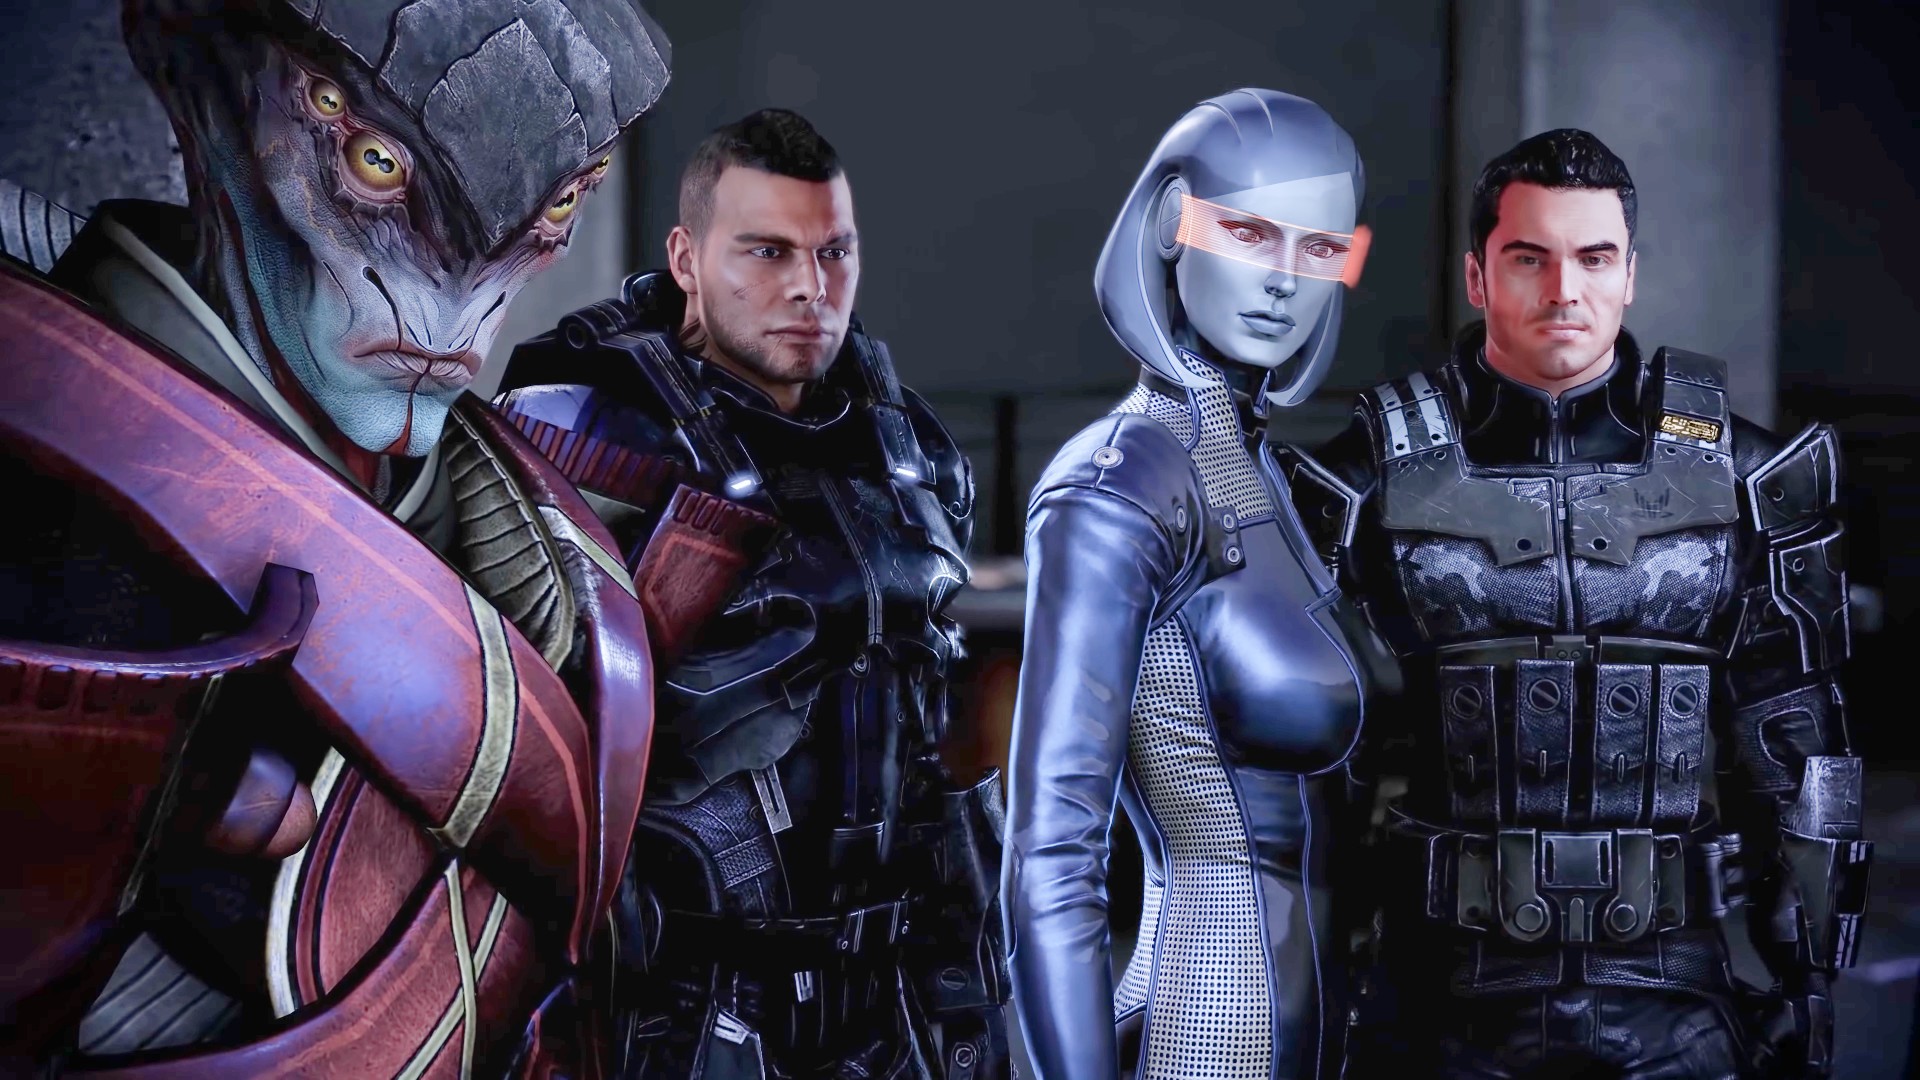 Characters in Mass Effect.